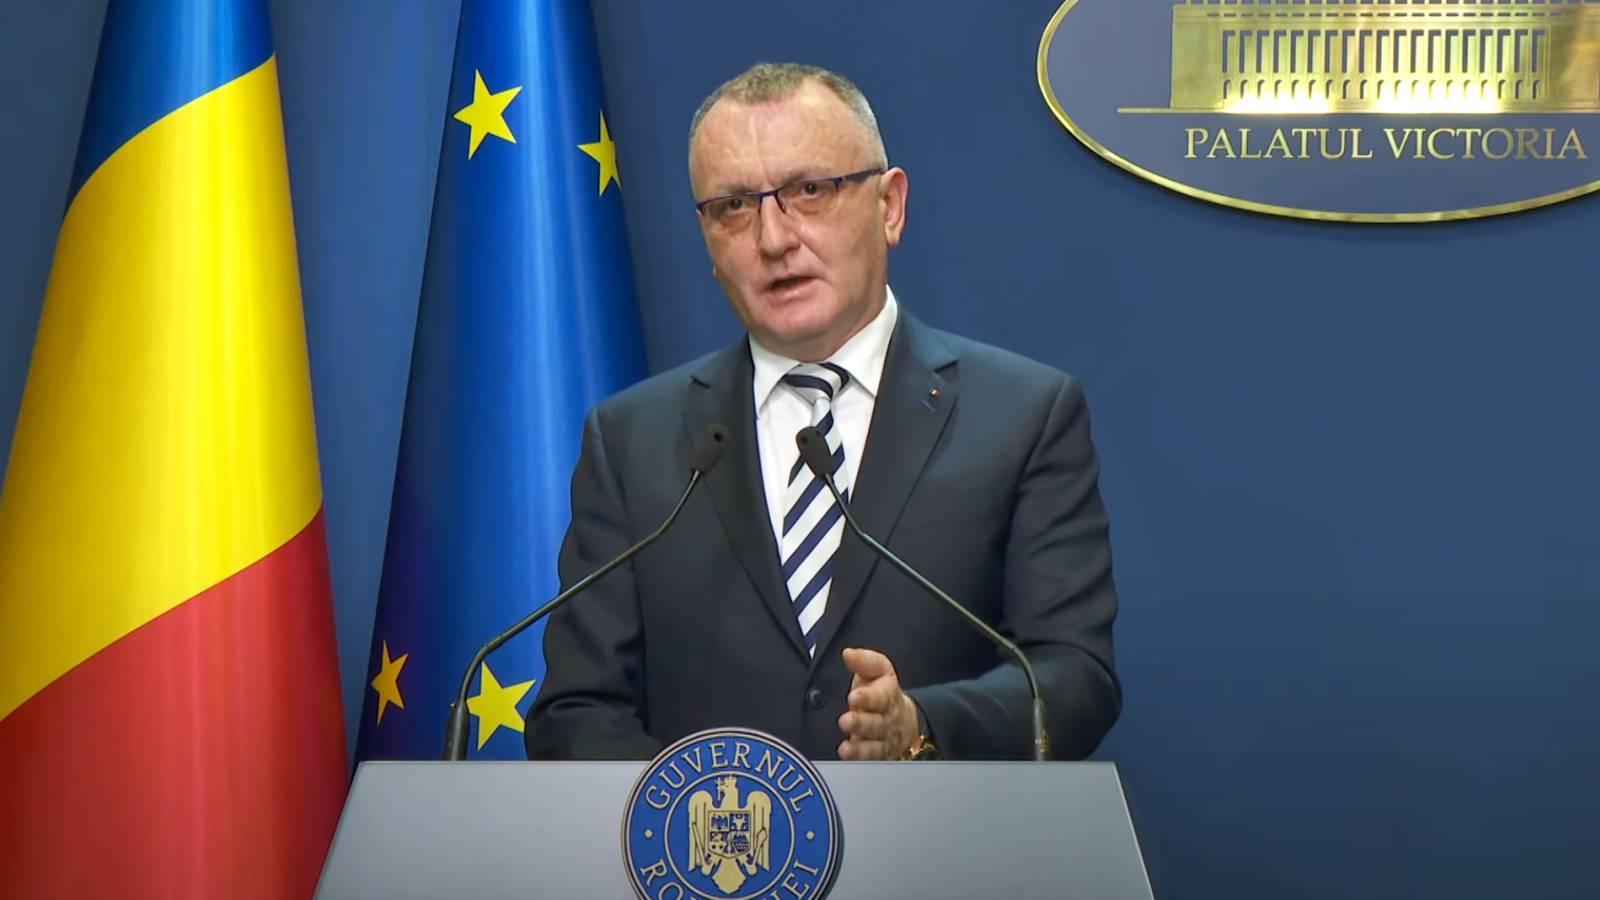 Minister of Education Important Last Minute Decision Announced to Romanians